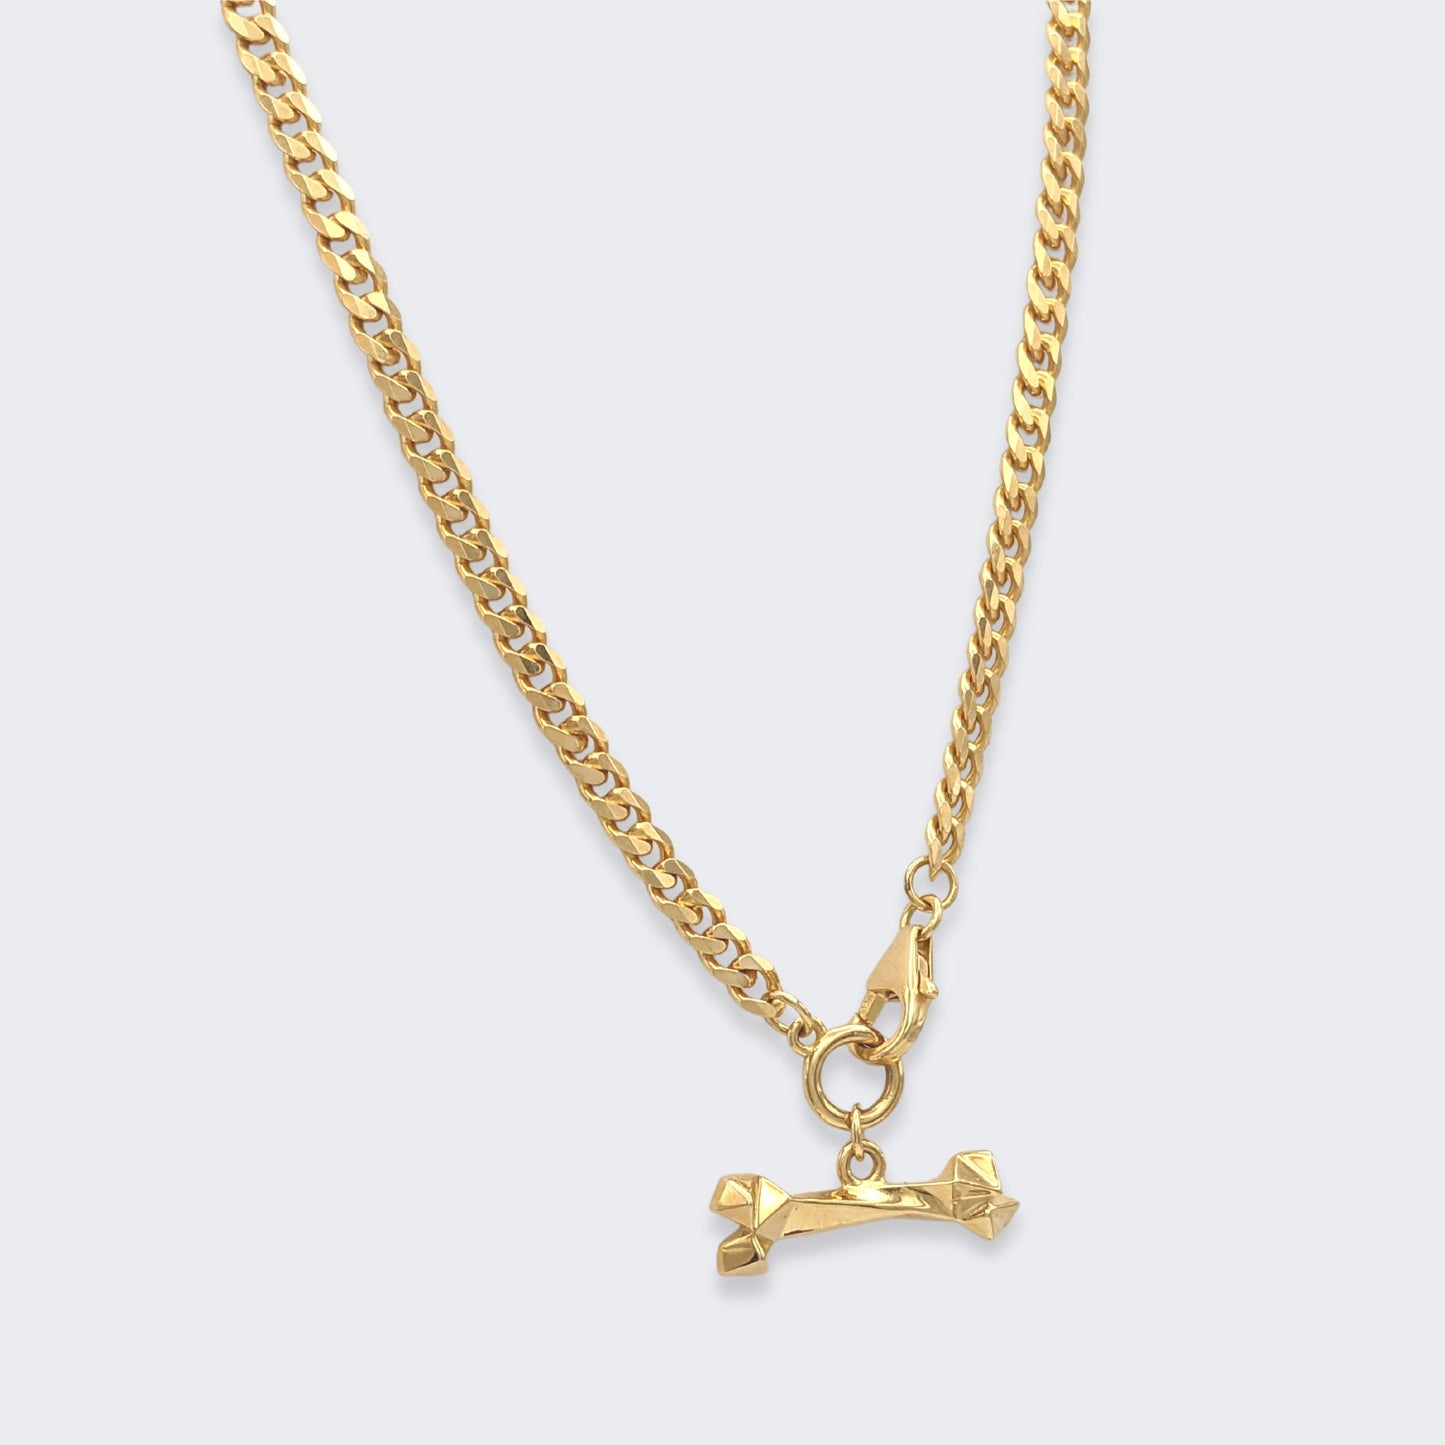 mars dog bone necklace in 18k gold vermeil right side view